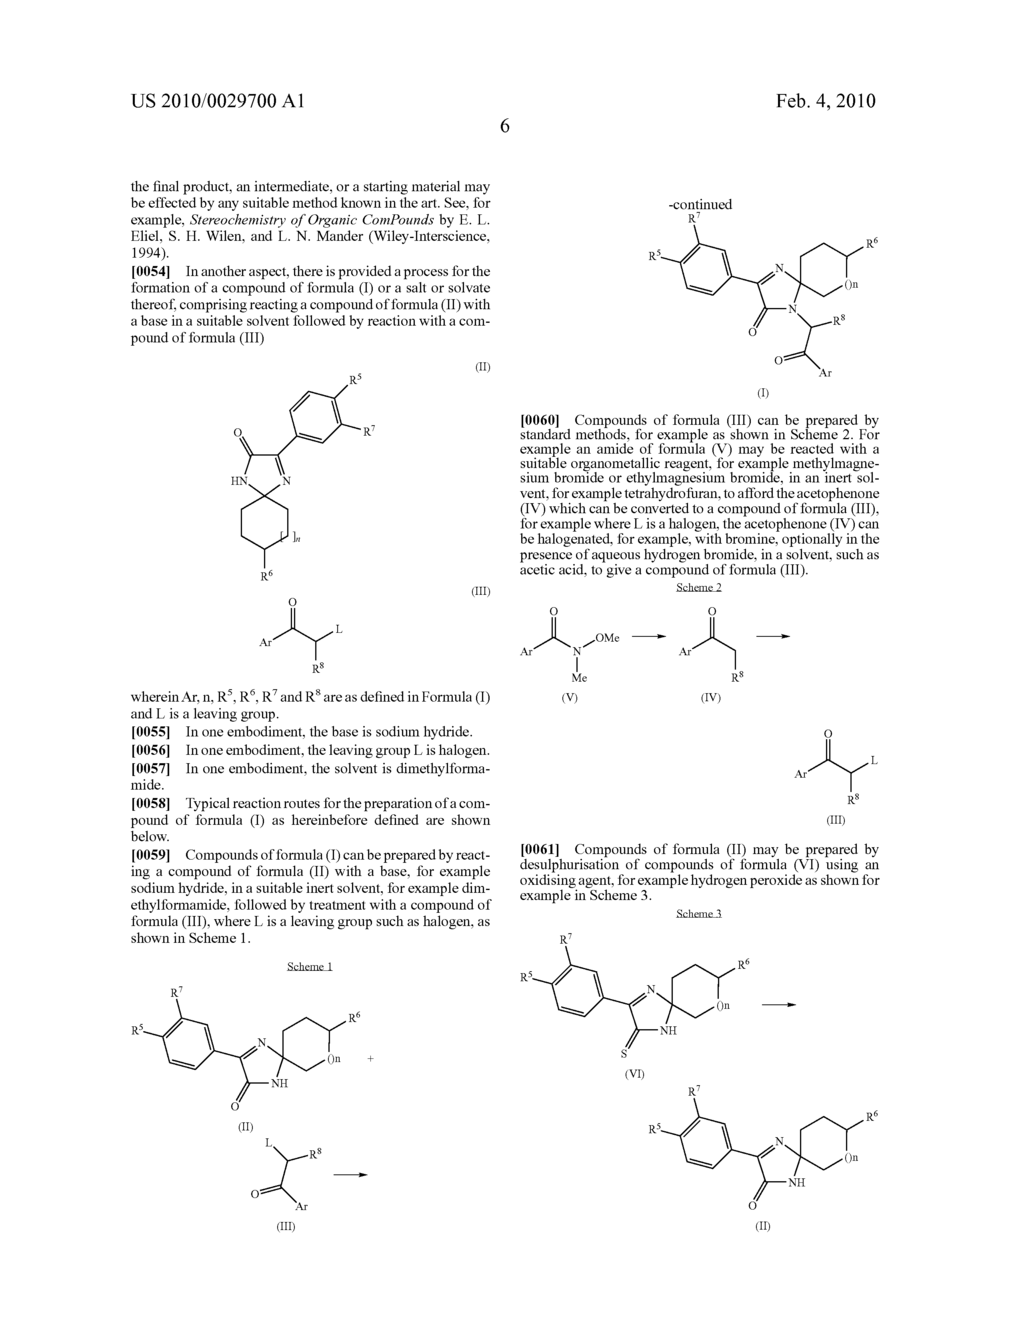 1-(2-ARYL-2-OXOETHYL)-3-PHENYL-1, 4-DIAZASPIRO [4.5]DEC-3-EN-2-ONE DERIVATIVES AND THEIR USE AS GLYCINE TRANSPORTER INHIBITORS - diagram, schematic, and image 08